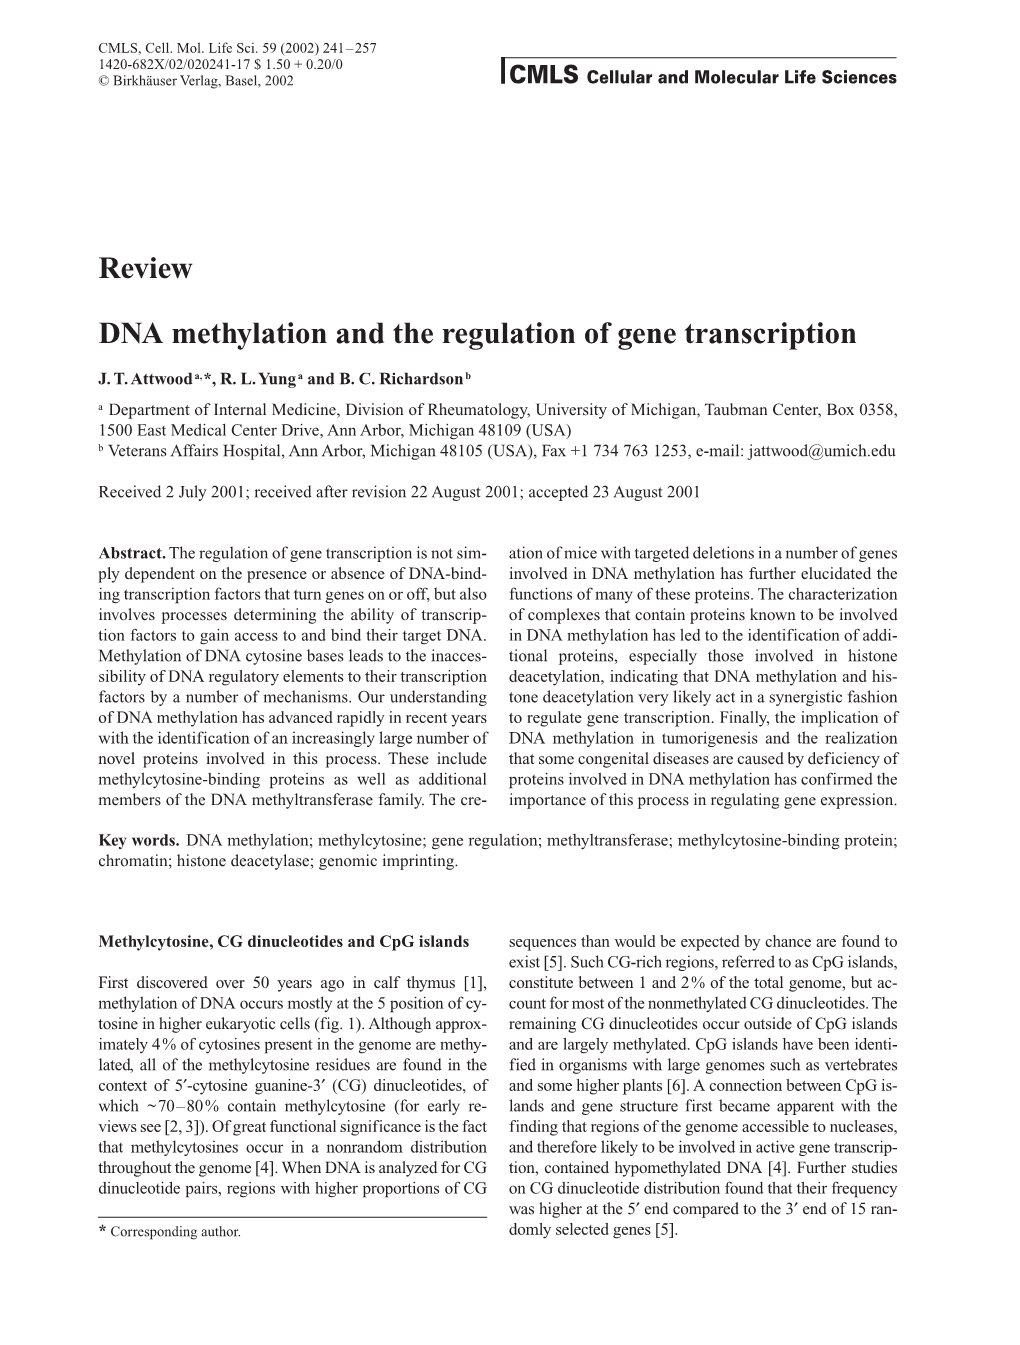 Review DNA Methylation and the Regulation of Gene Transcription